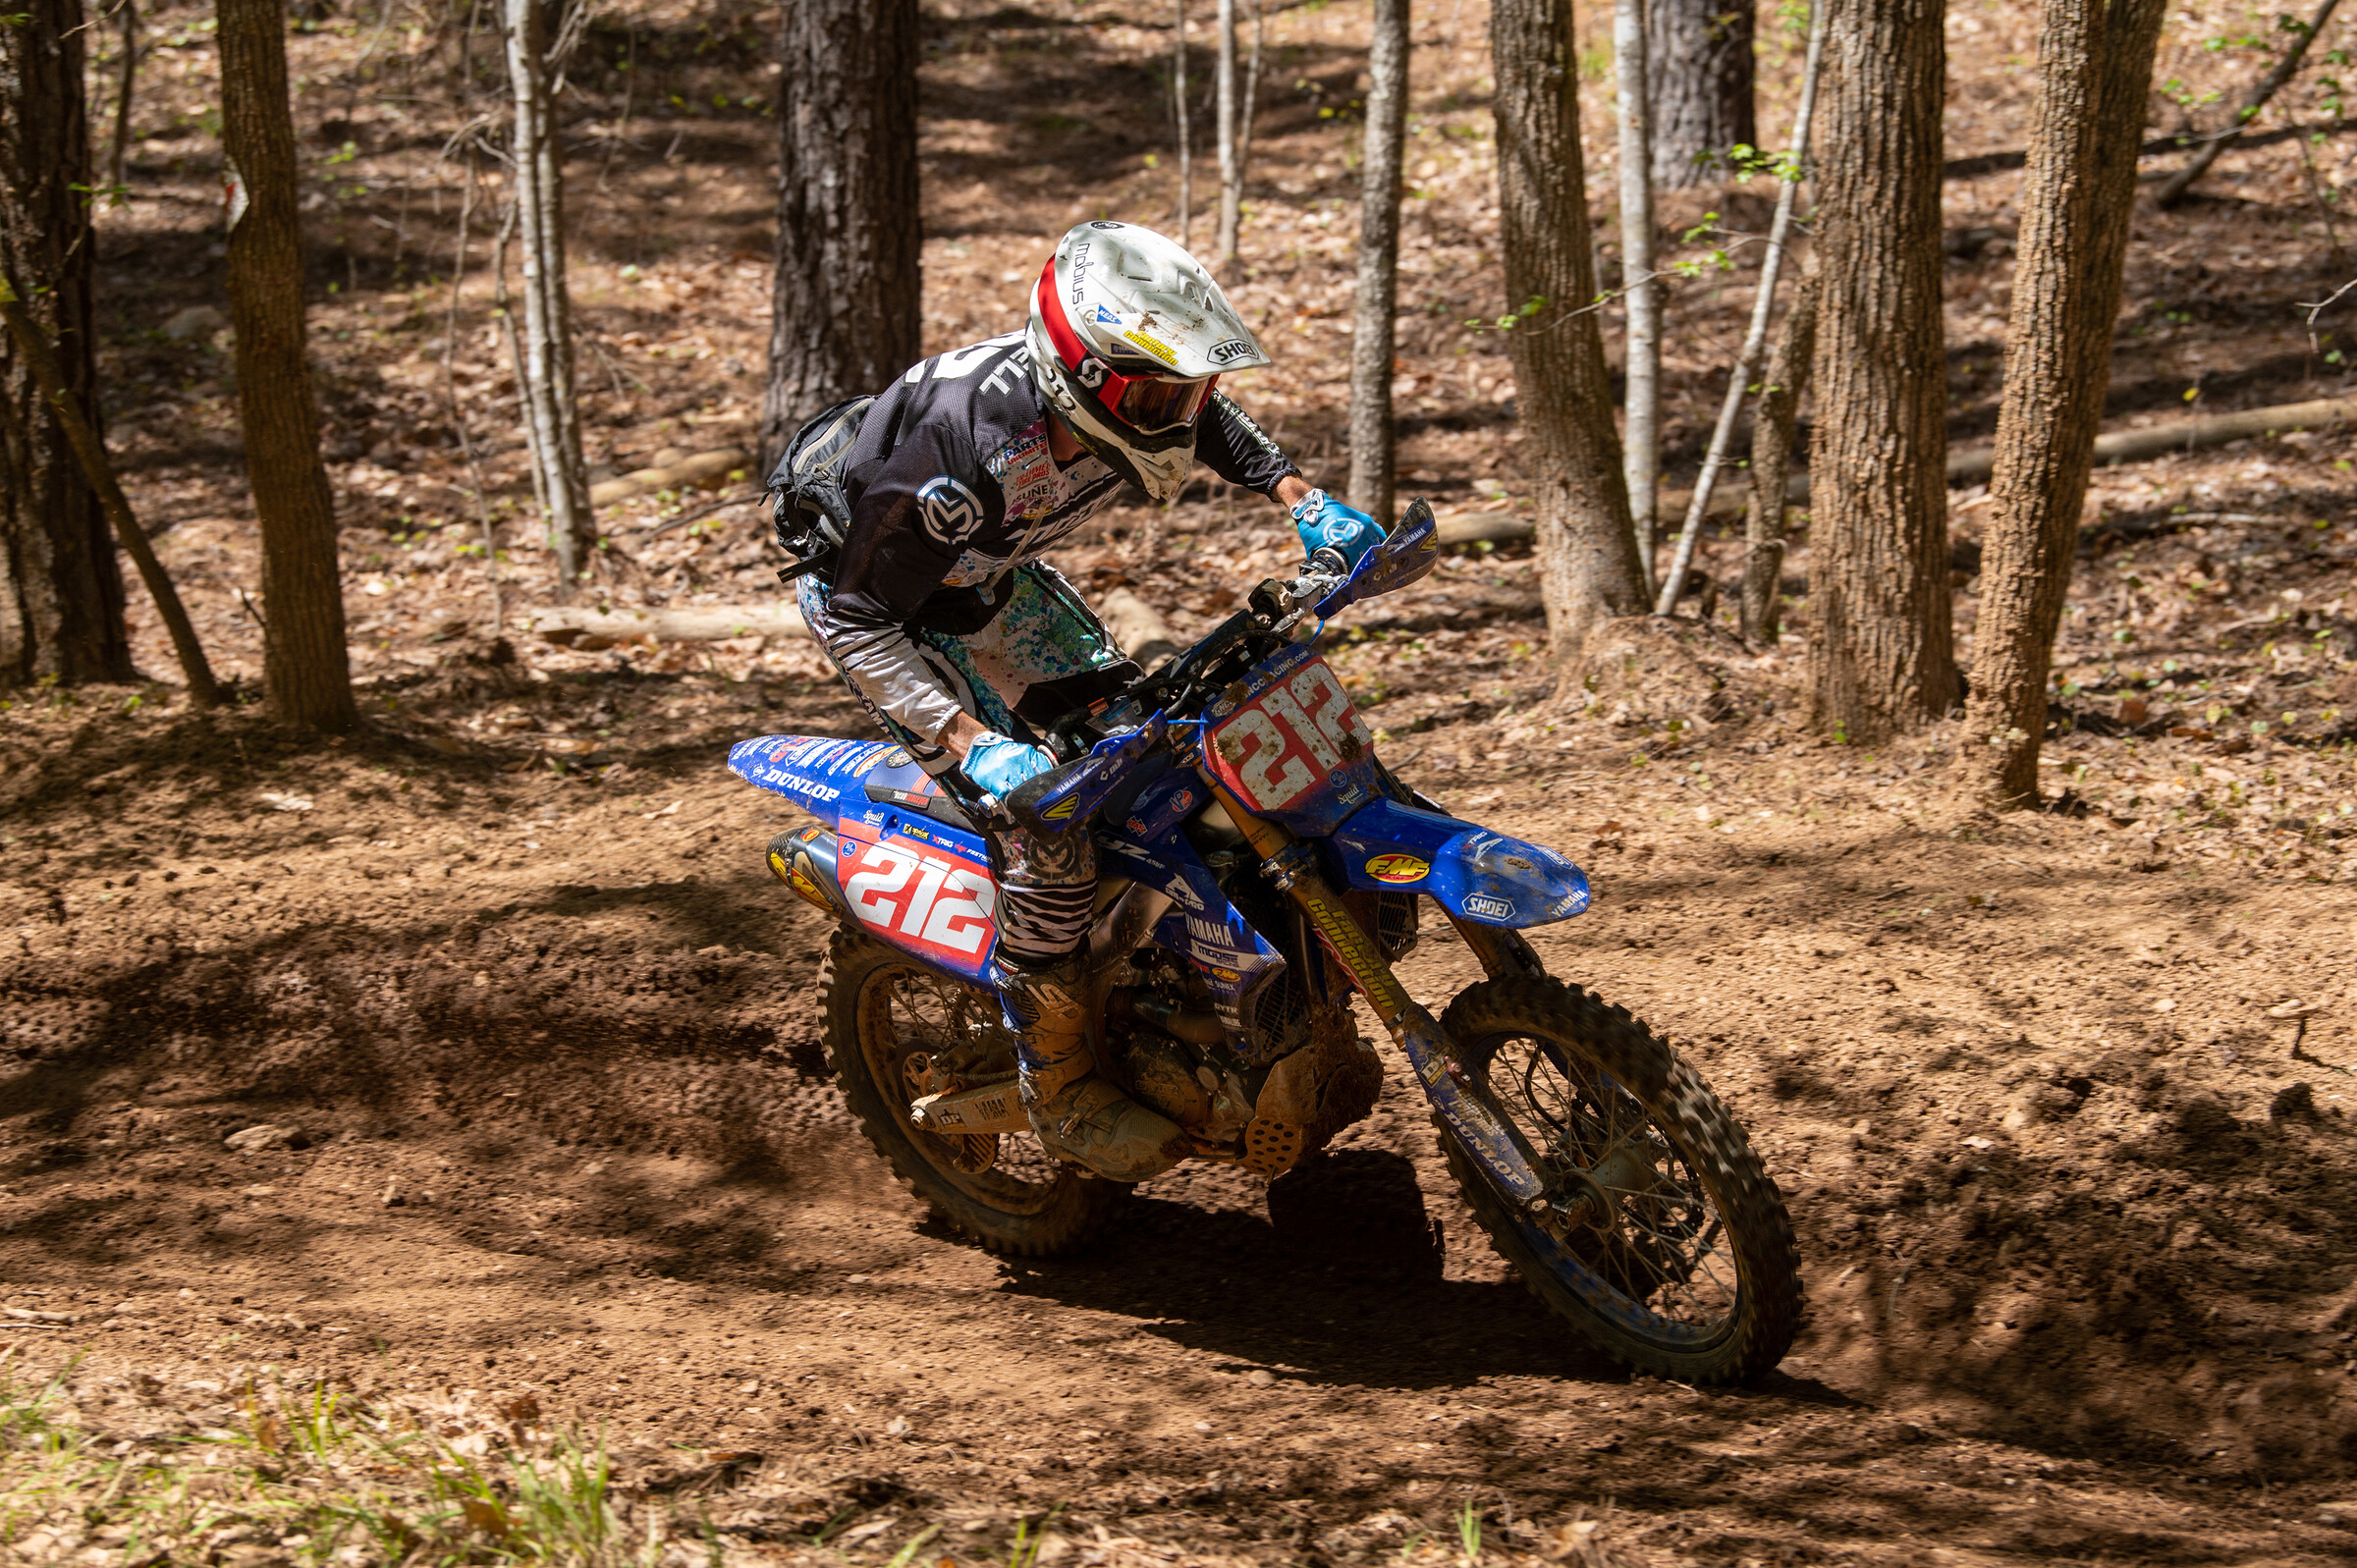 Ricky Russell (AmPro Yamaha) earned his first win of 2023 at the Dunlop Tires Tiger Run.